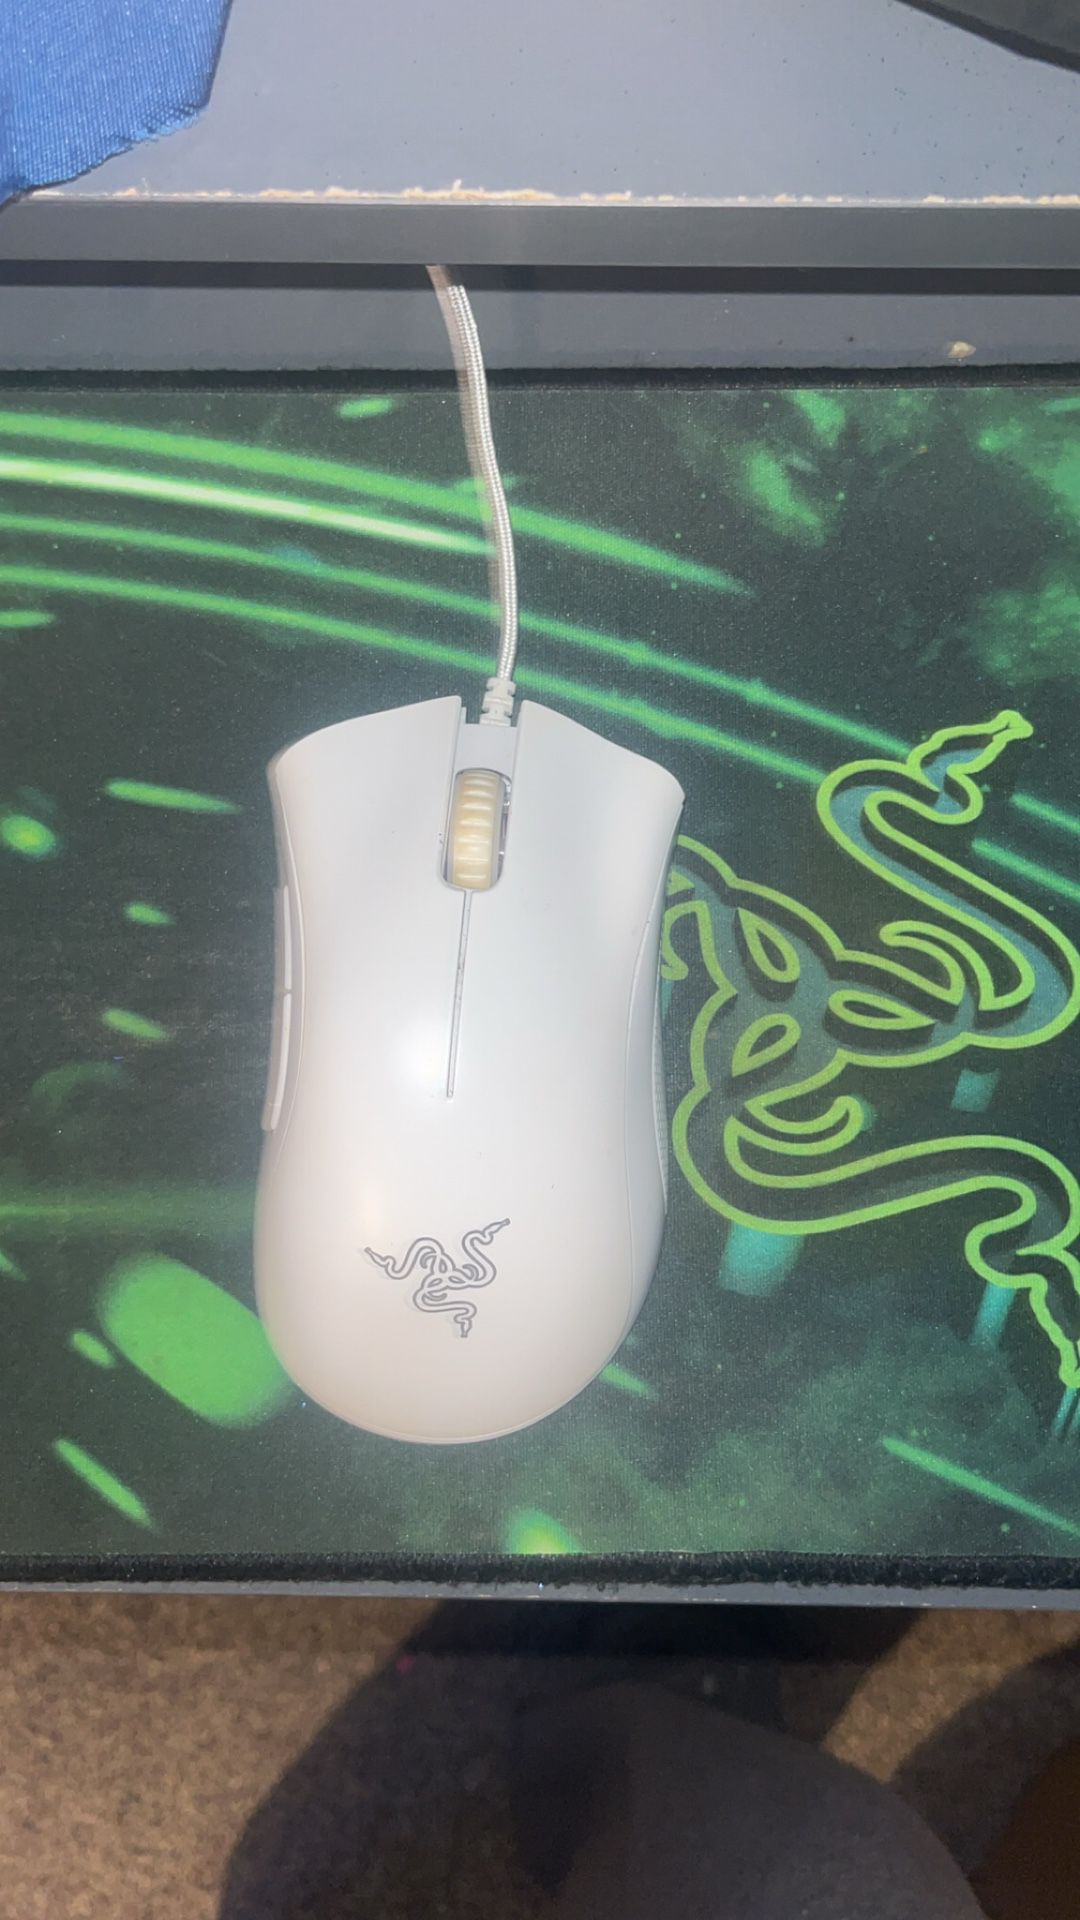 turtle beach mouse with turtle beach mouse pad